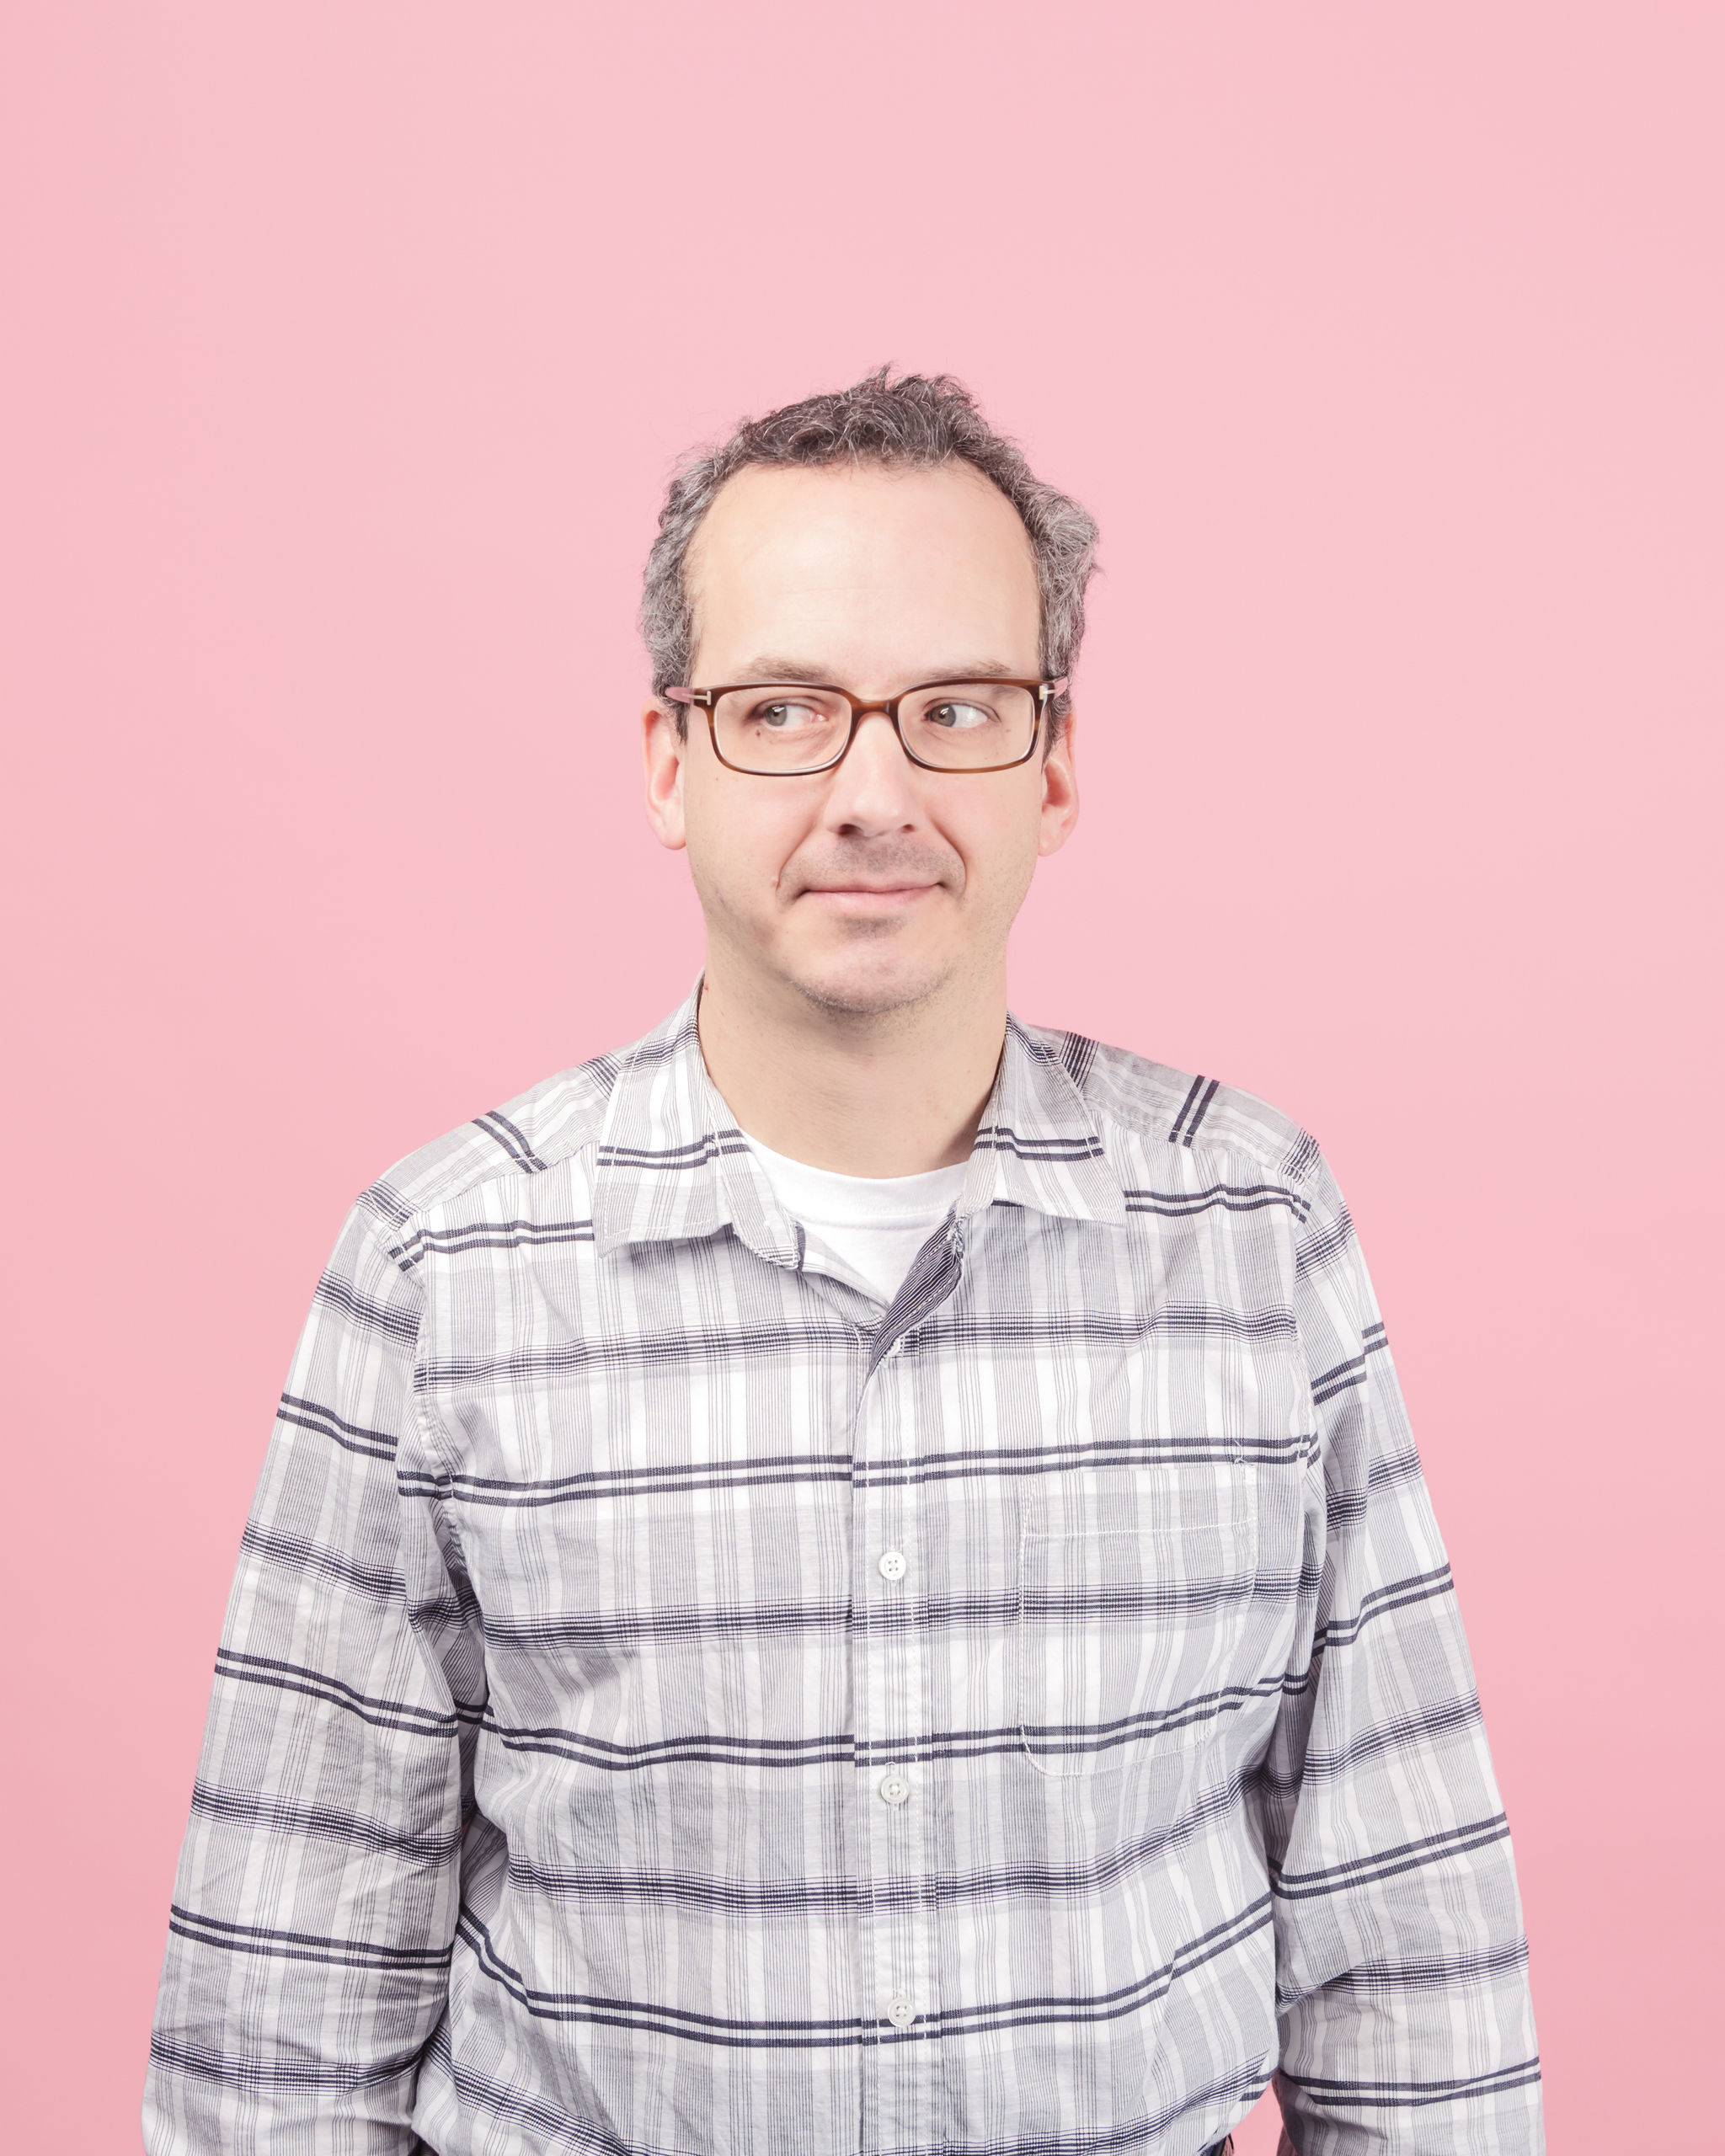 Headshot photograph of John Dunlevy facing forward with his eyes looking off to the right—wearing glasses and a button down black and white plaid pocket shirt while standing in front of a pink background